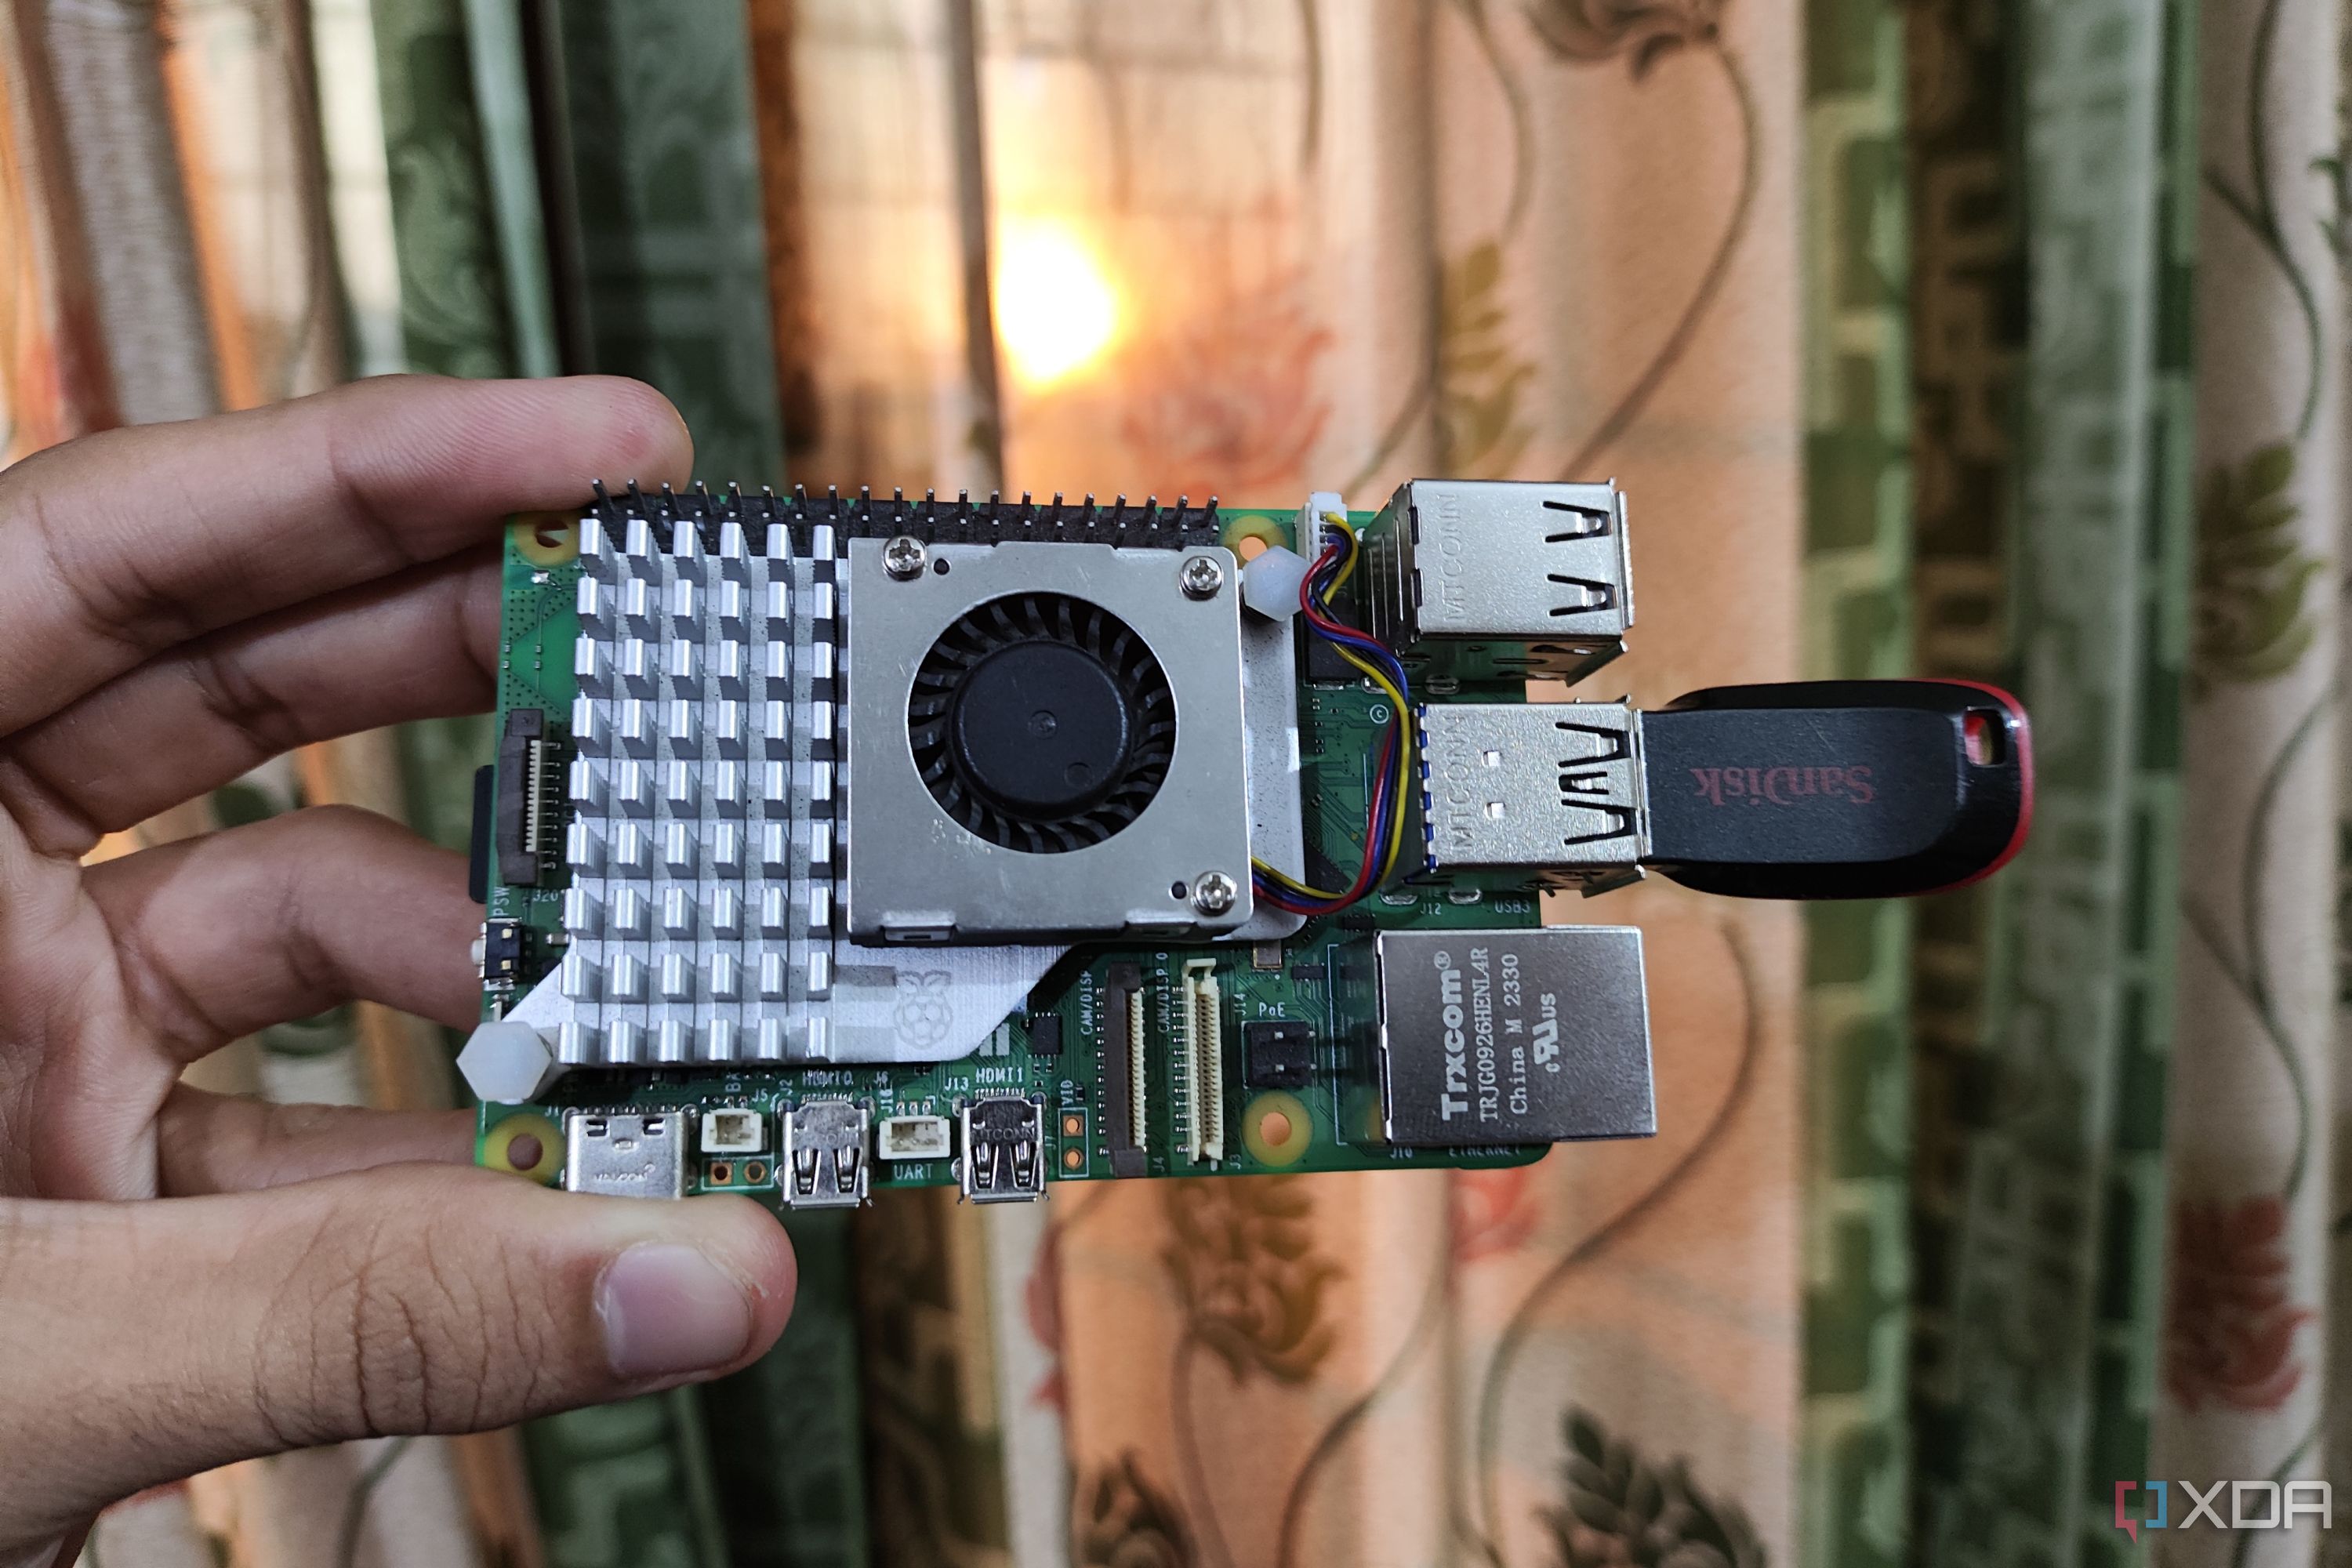 A Raspberry Pi 5 with a USB drive attached to it